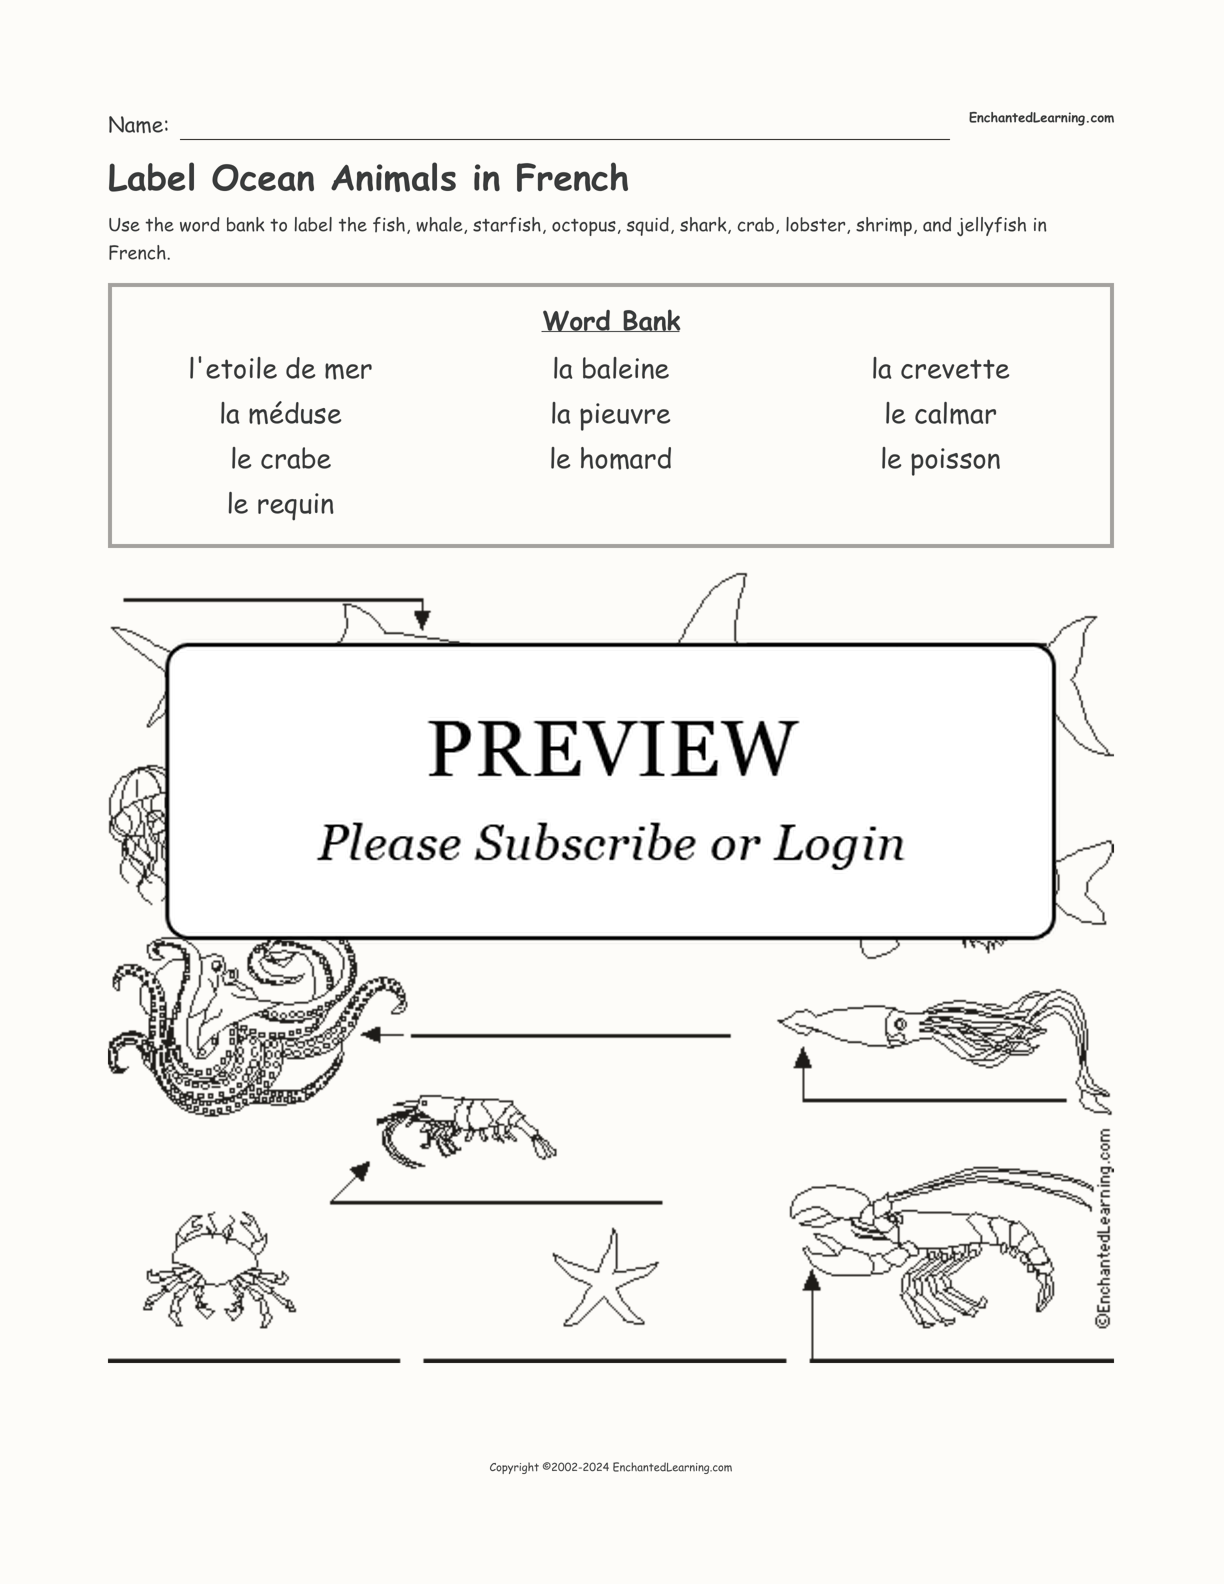 Label Ocean Animals in French interactive worksheet page 1